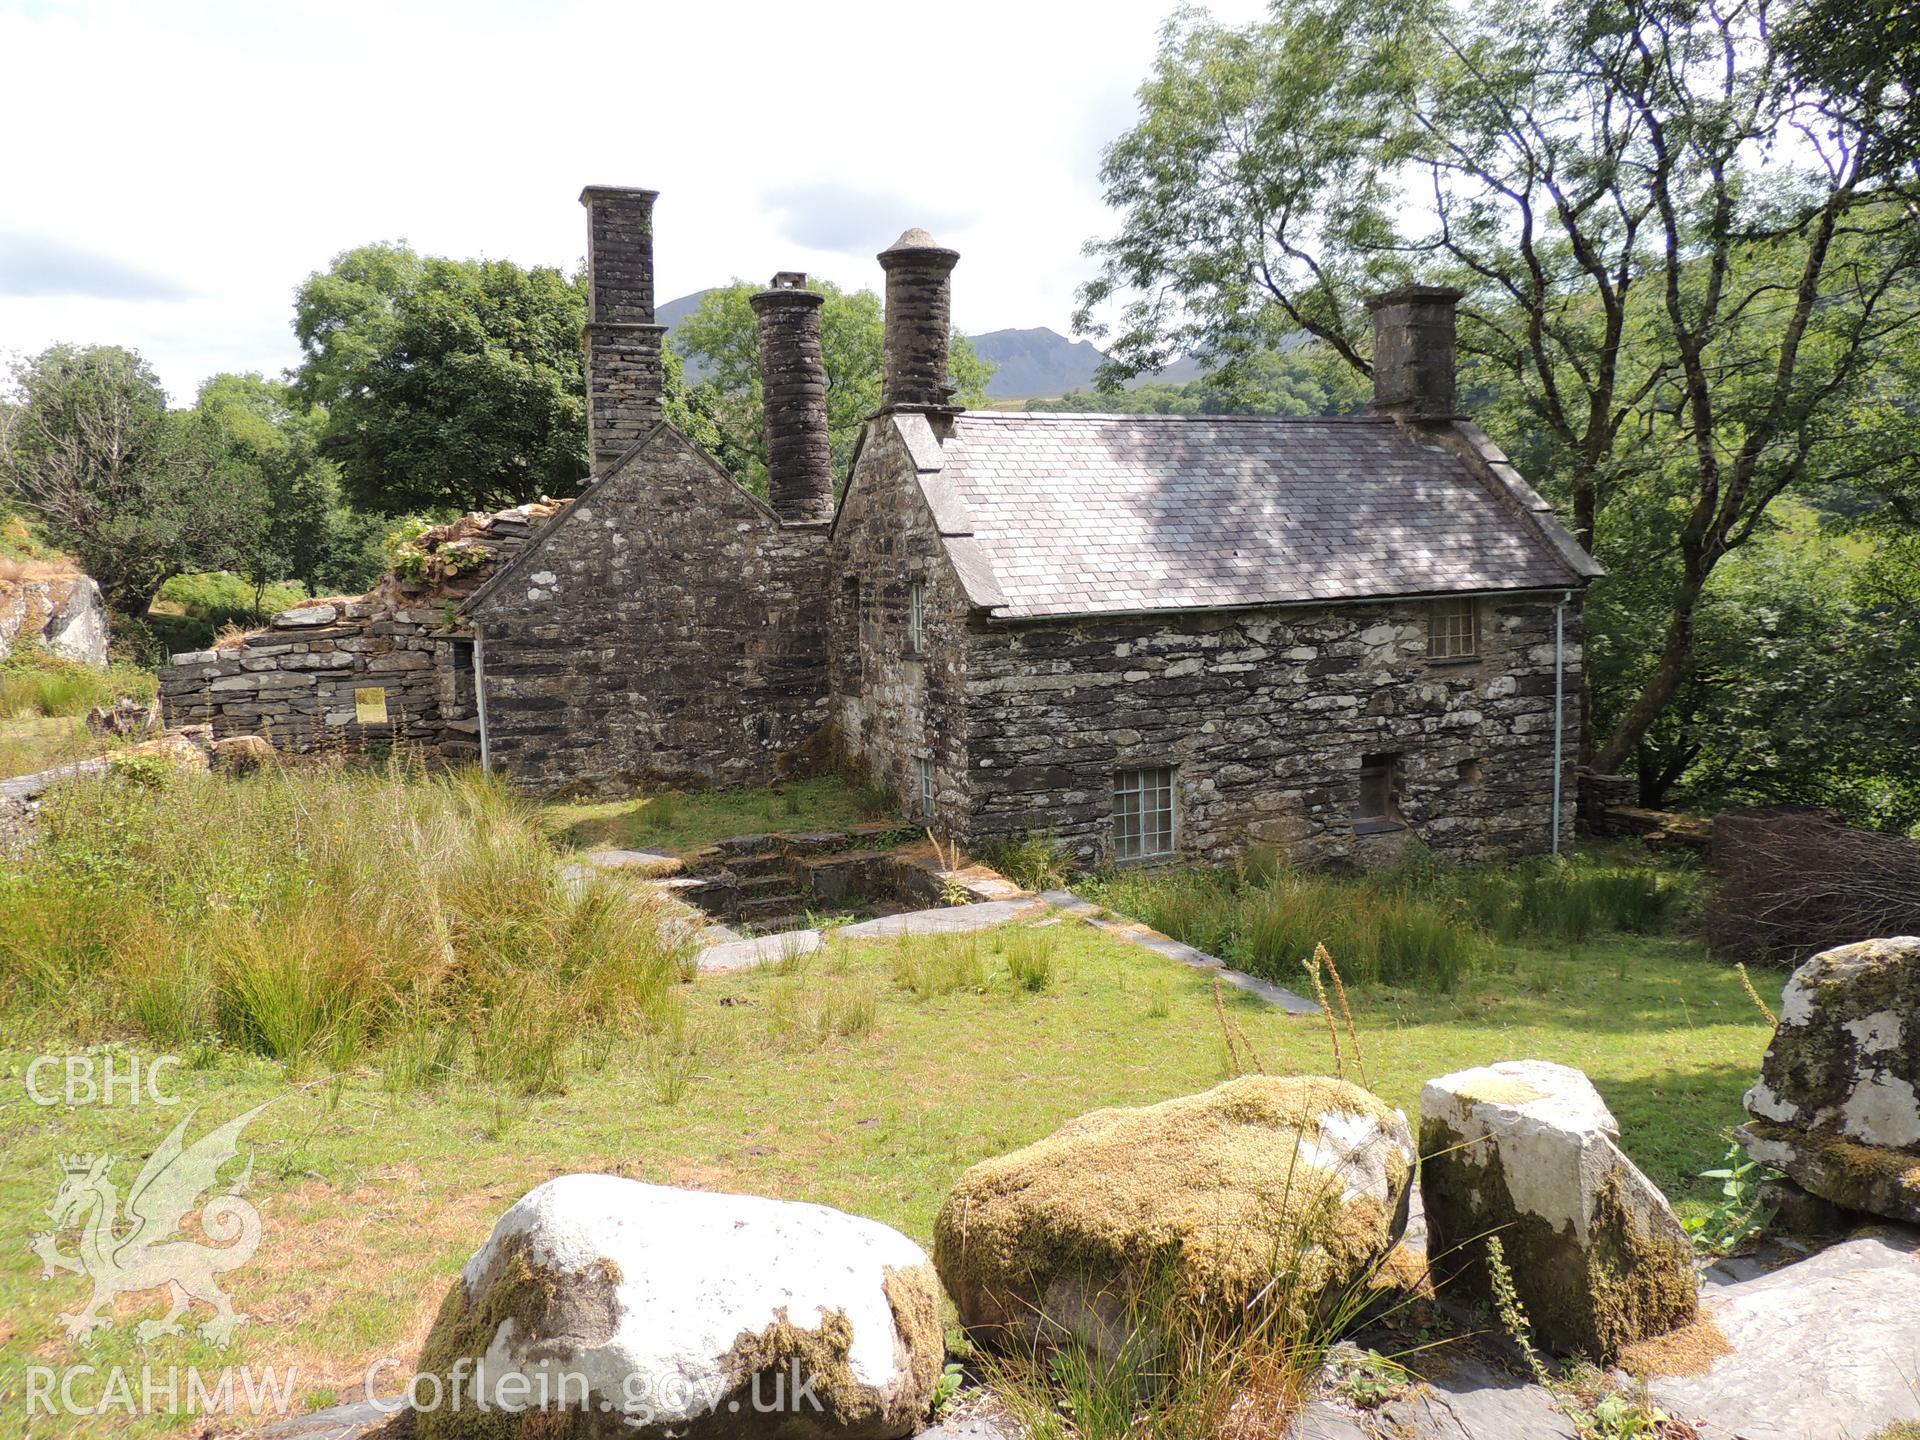 'View looking east at Parc house.' Photographed as part of desk based assessment and heritage impact assessment of a hydro scheme on the Afon Croesor, Brondanw Estate, Gwynedd. Produced by Archaeology Wales for Renewables First Ltd. 2018.